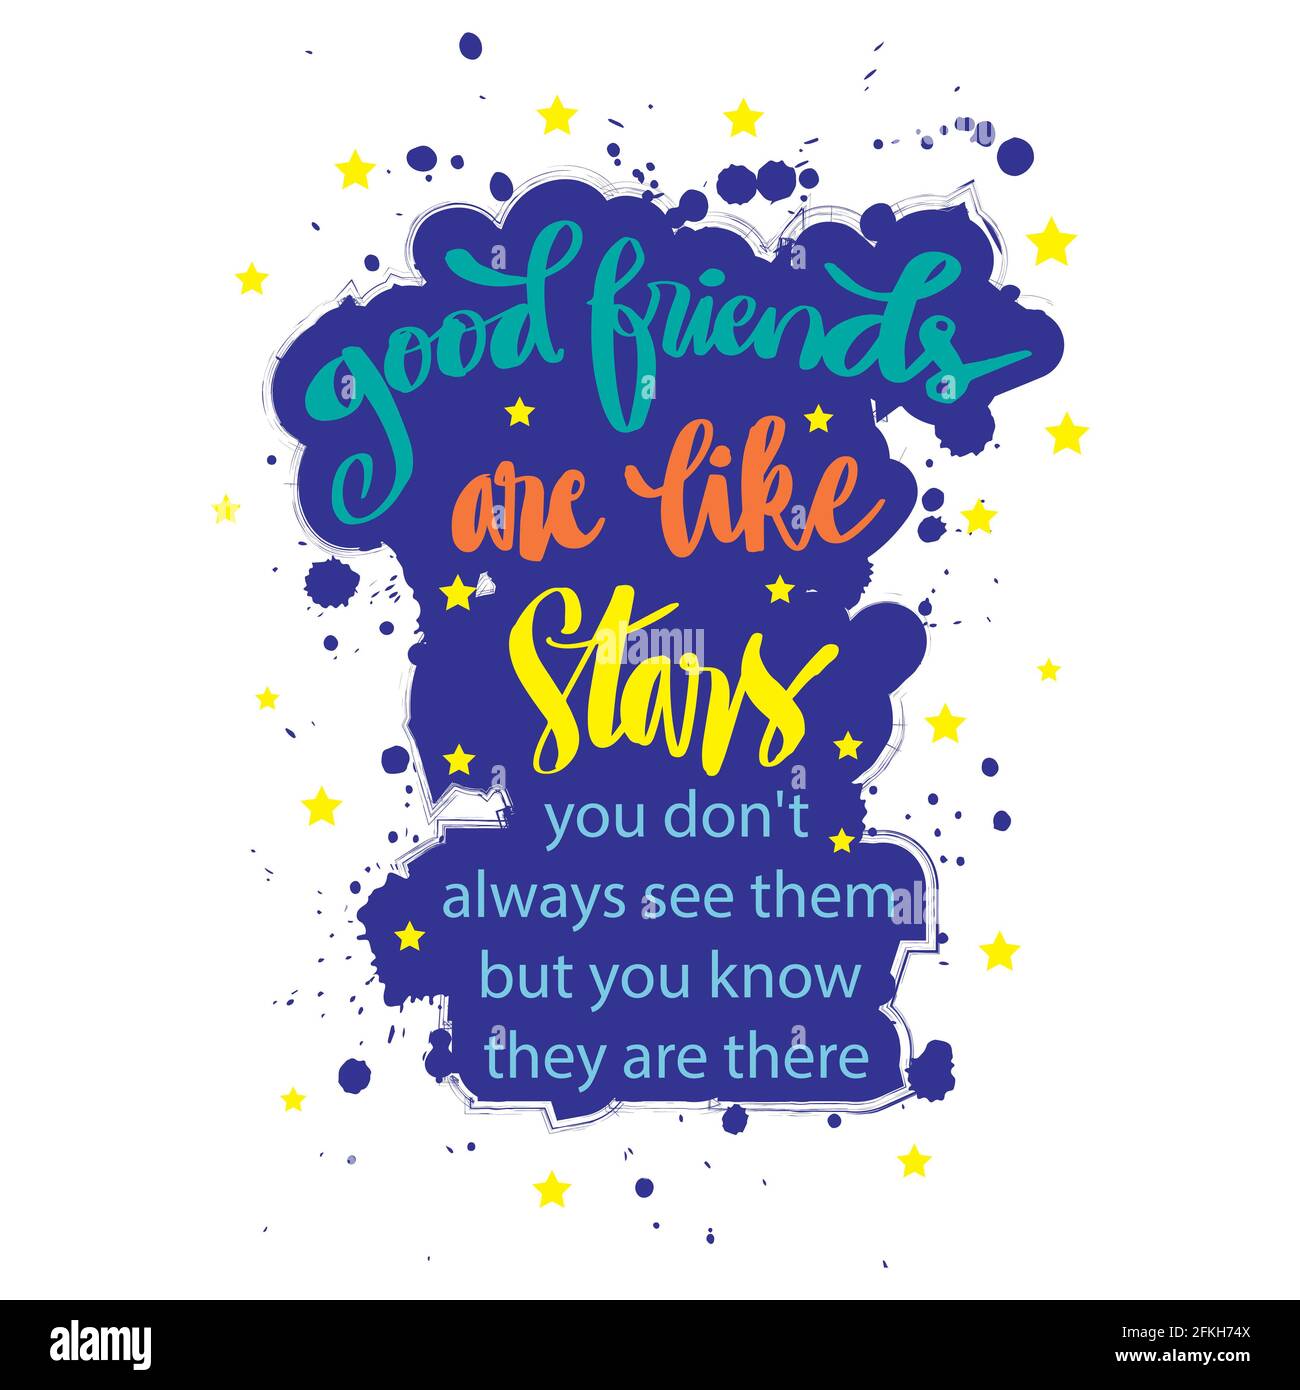 Good friends are like stars you do not always see them but you know they are always there. Motivational quote. Stock Photo